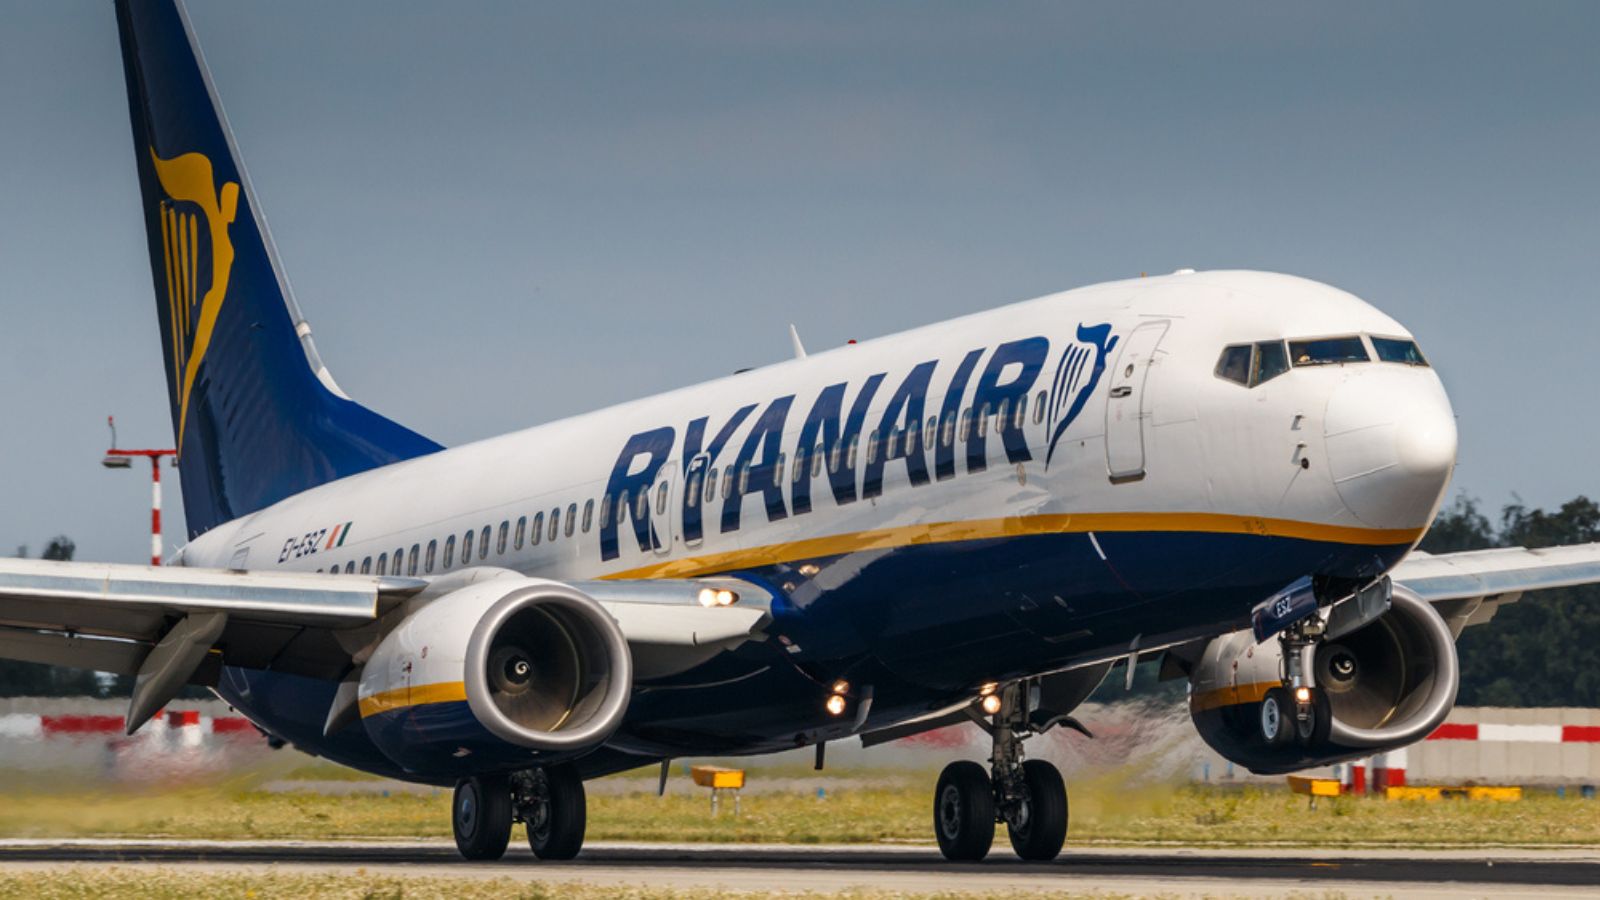 Ryanair Leads the Way Among Europe's Top Three Low-Cost Carriers